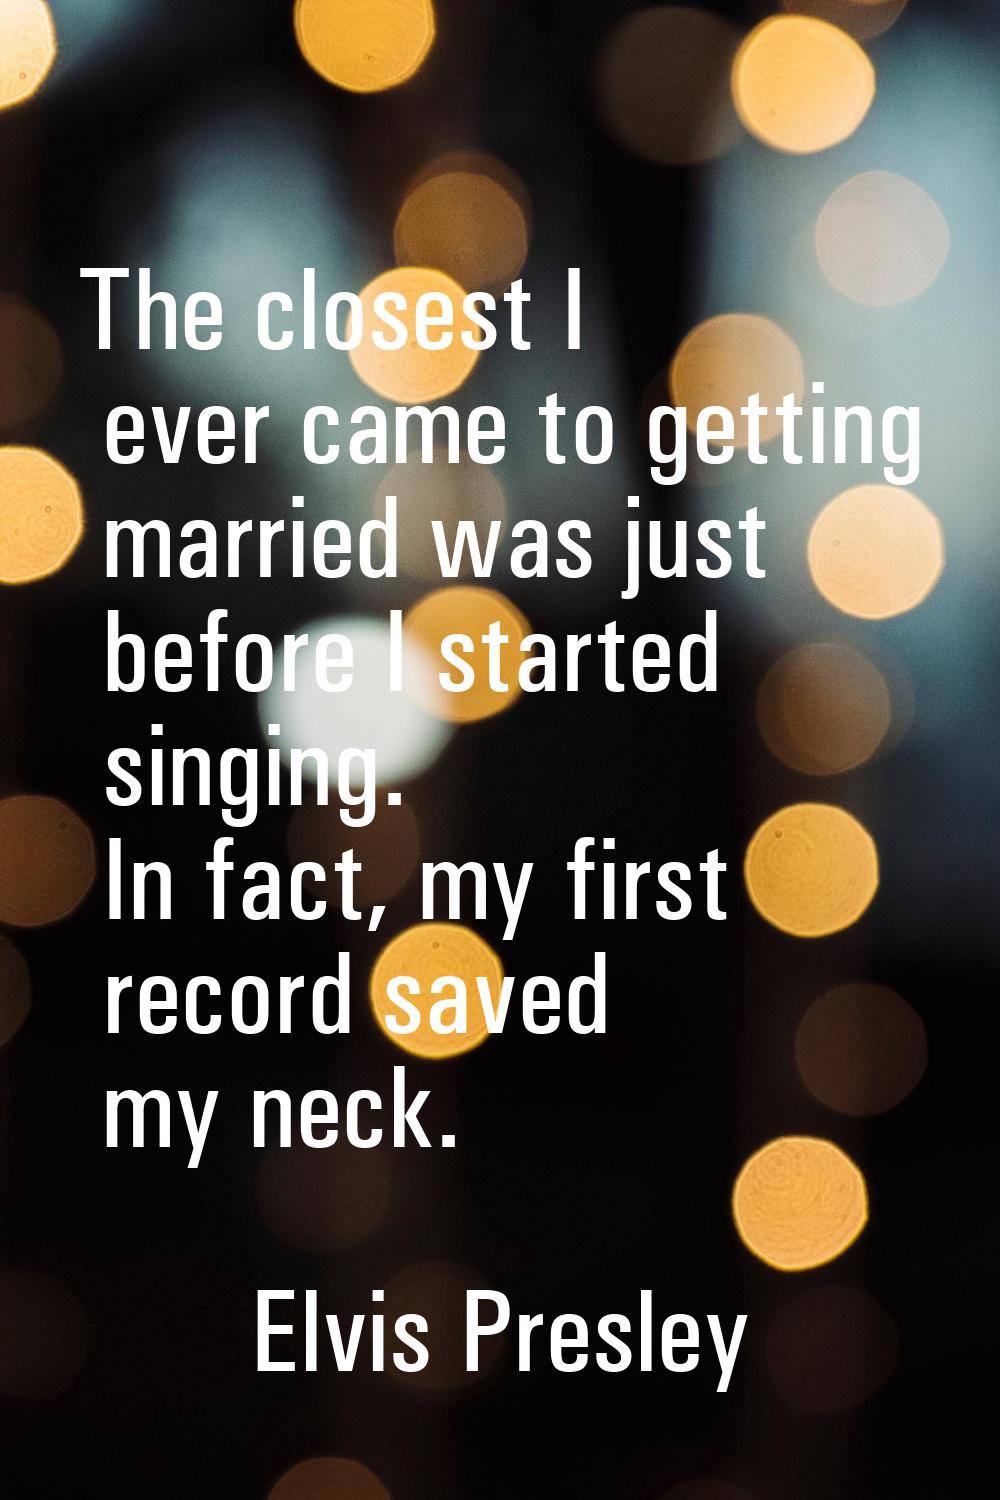 The closest I ever came to getting married was just before I started singing. In fact, my first rec